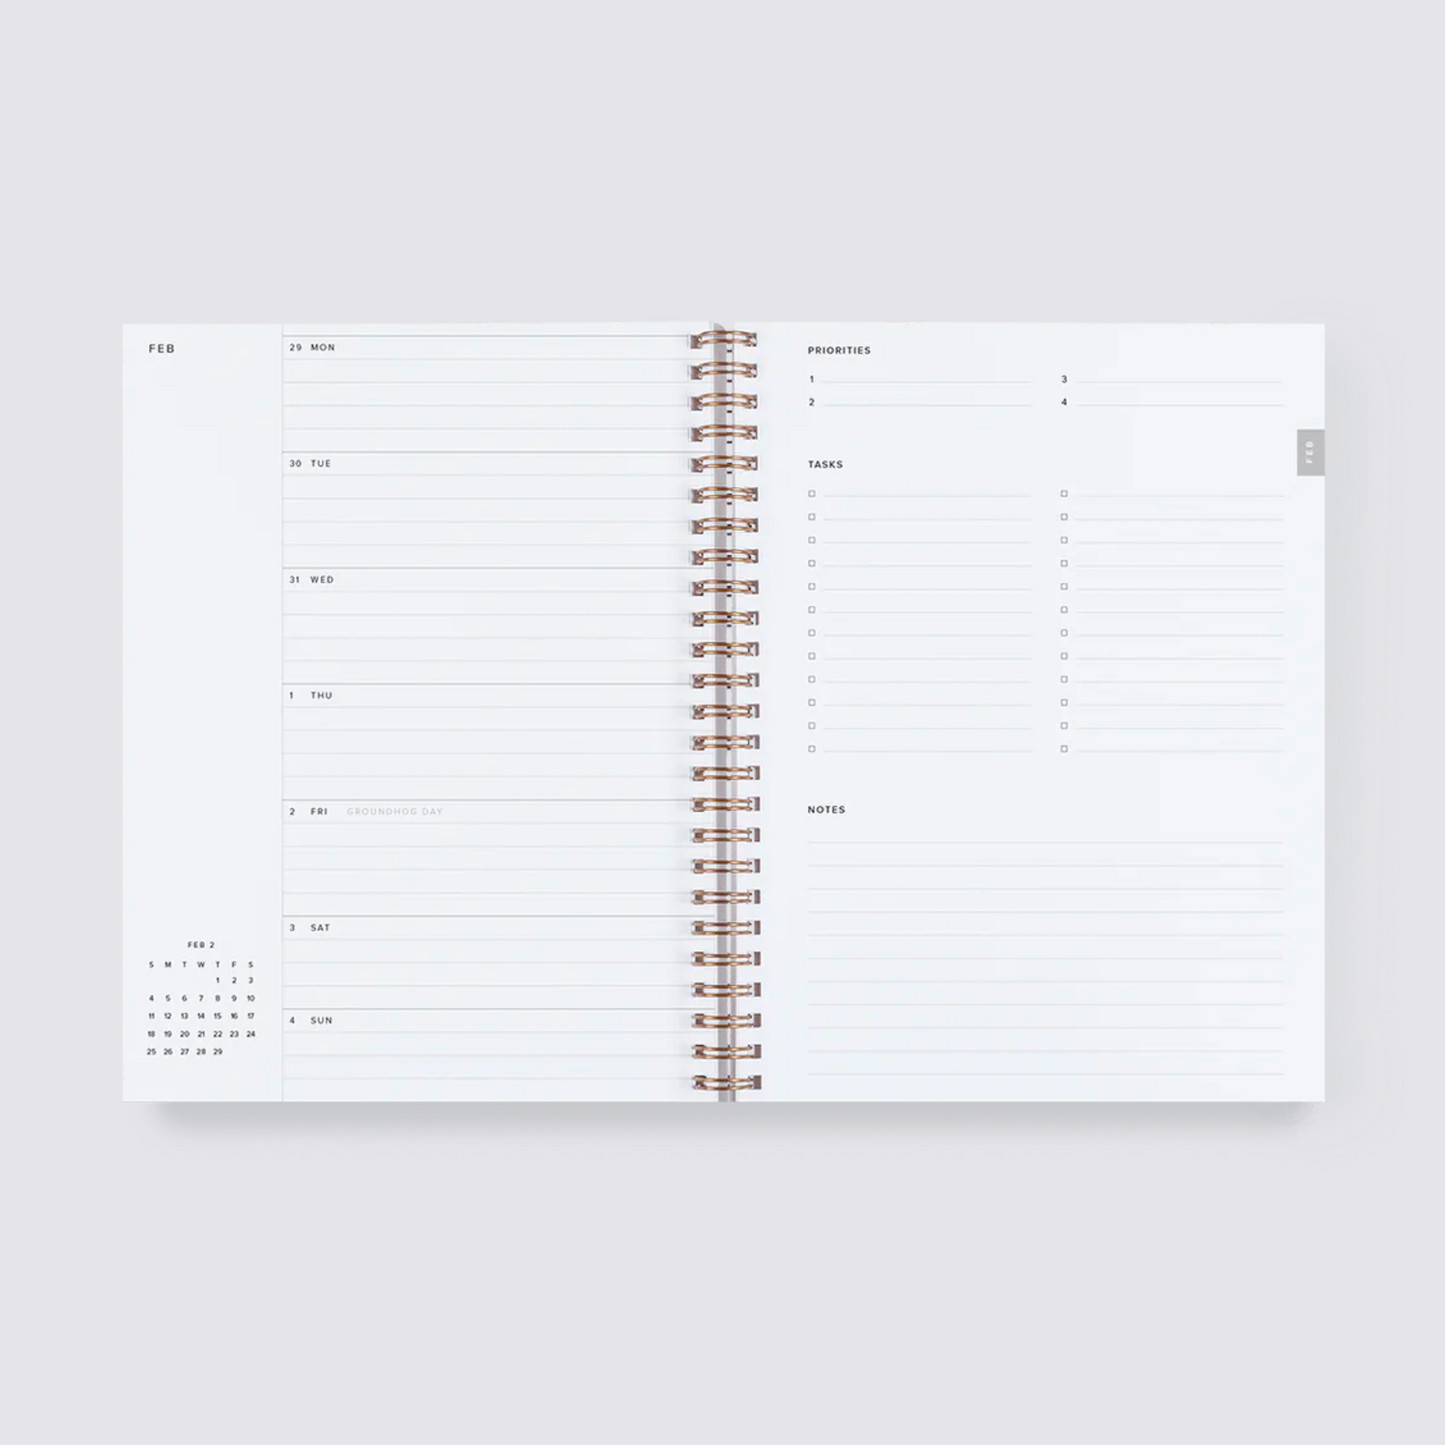 2024 Compact Task Planner - Charcoal Grey